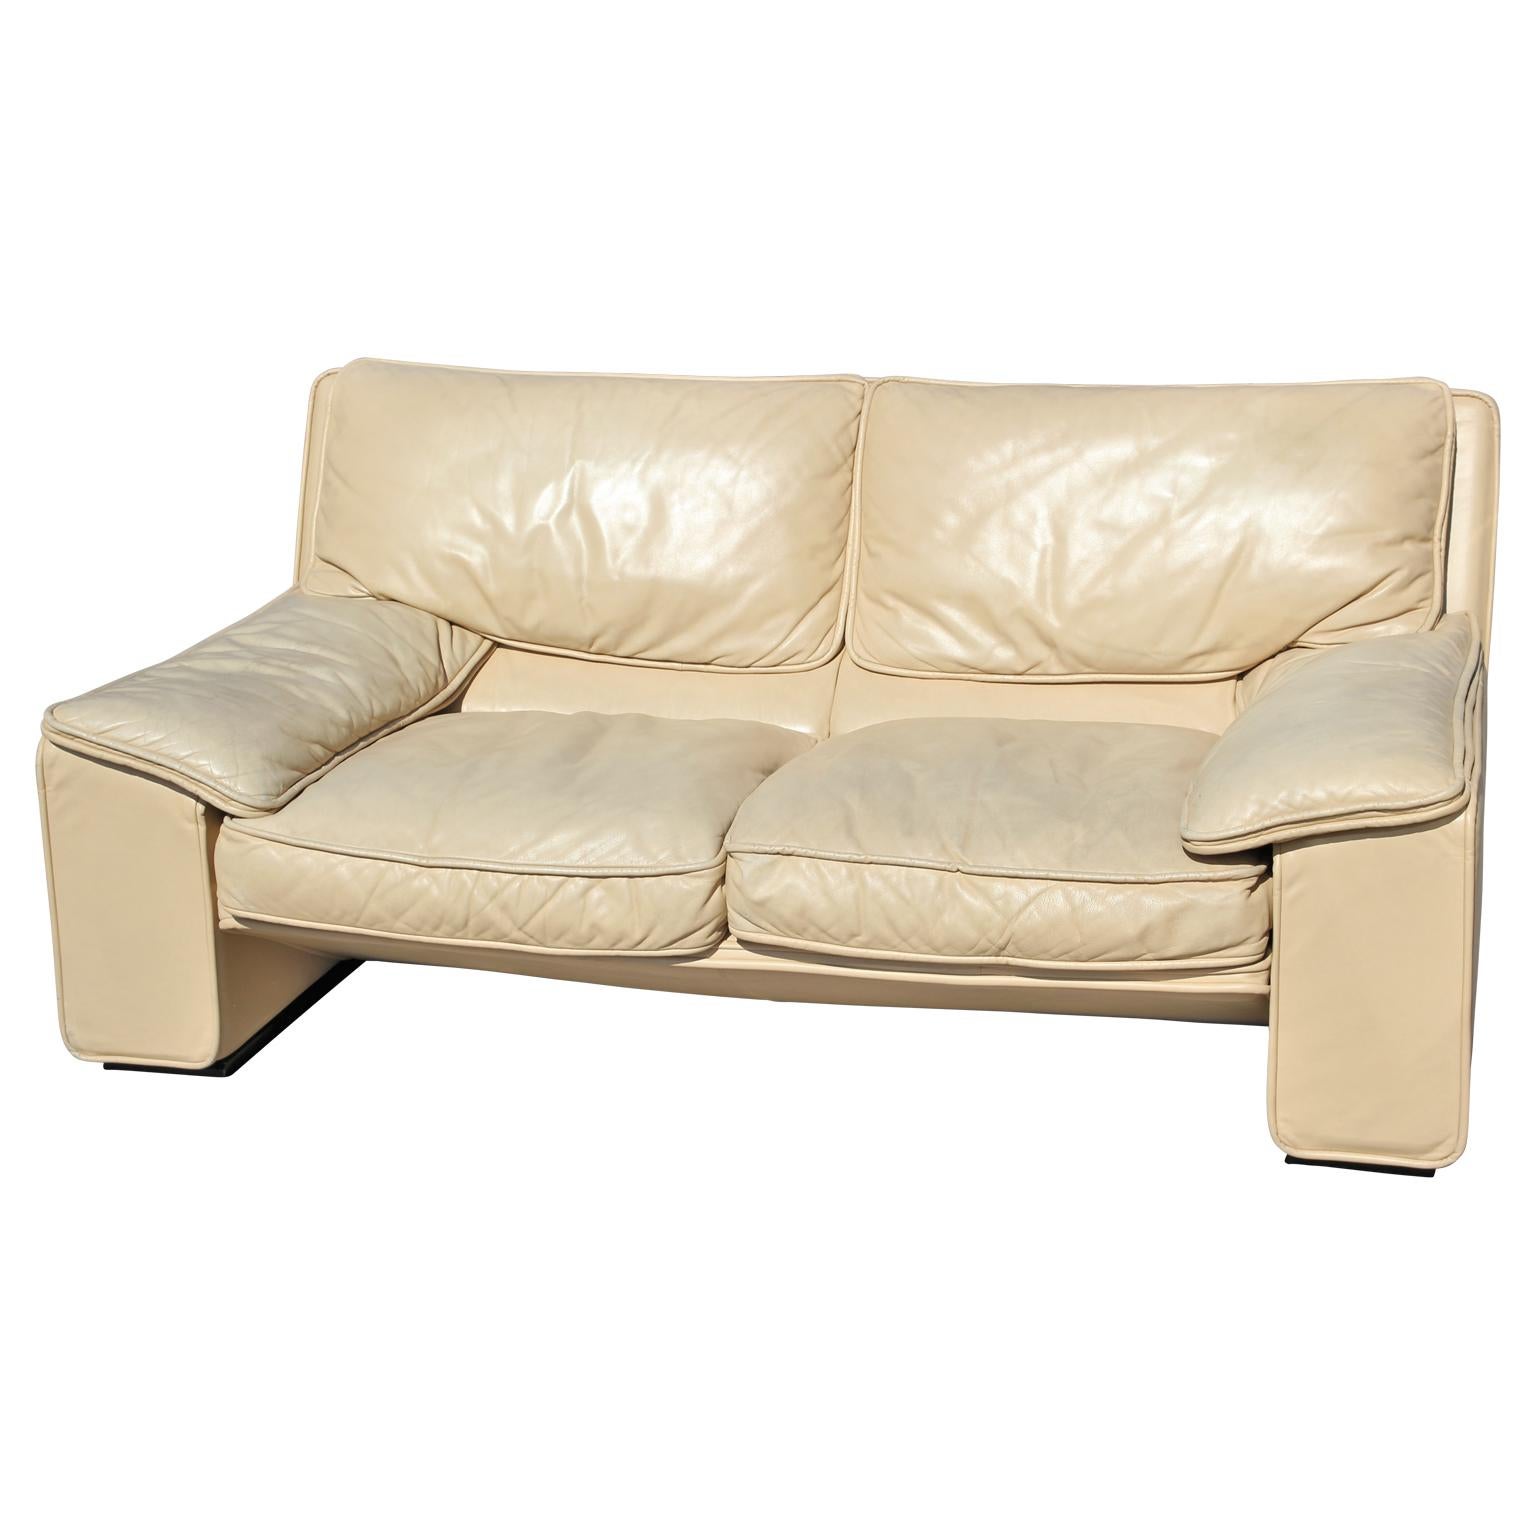 Brunati Postmodern Italian leather two-seat sofa / settee. Light wear too arms and seats. Our leather specialist can restore this for around $750.